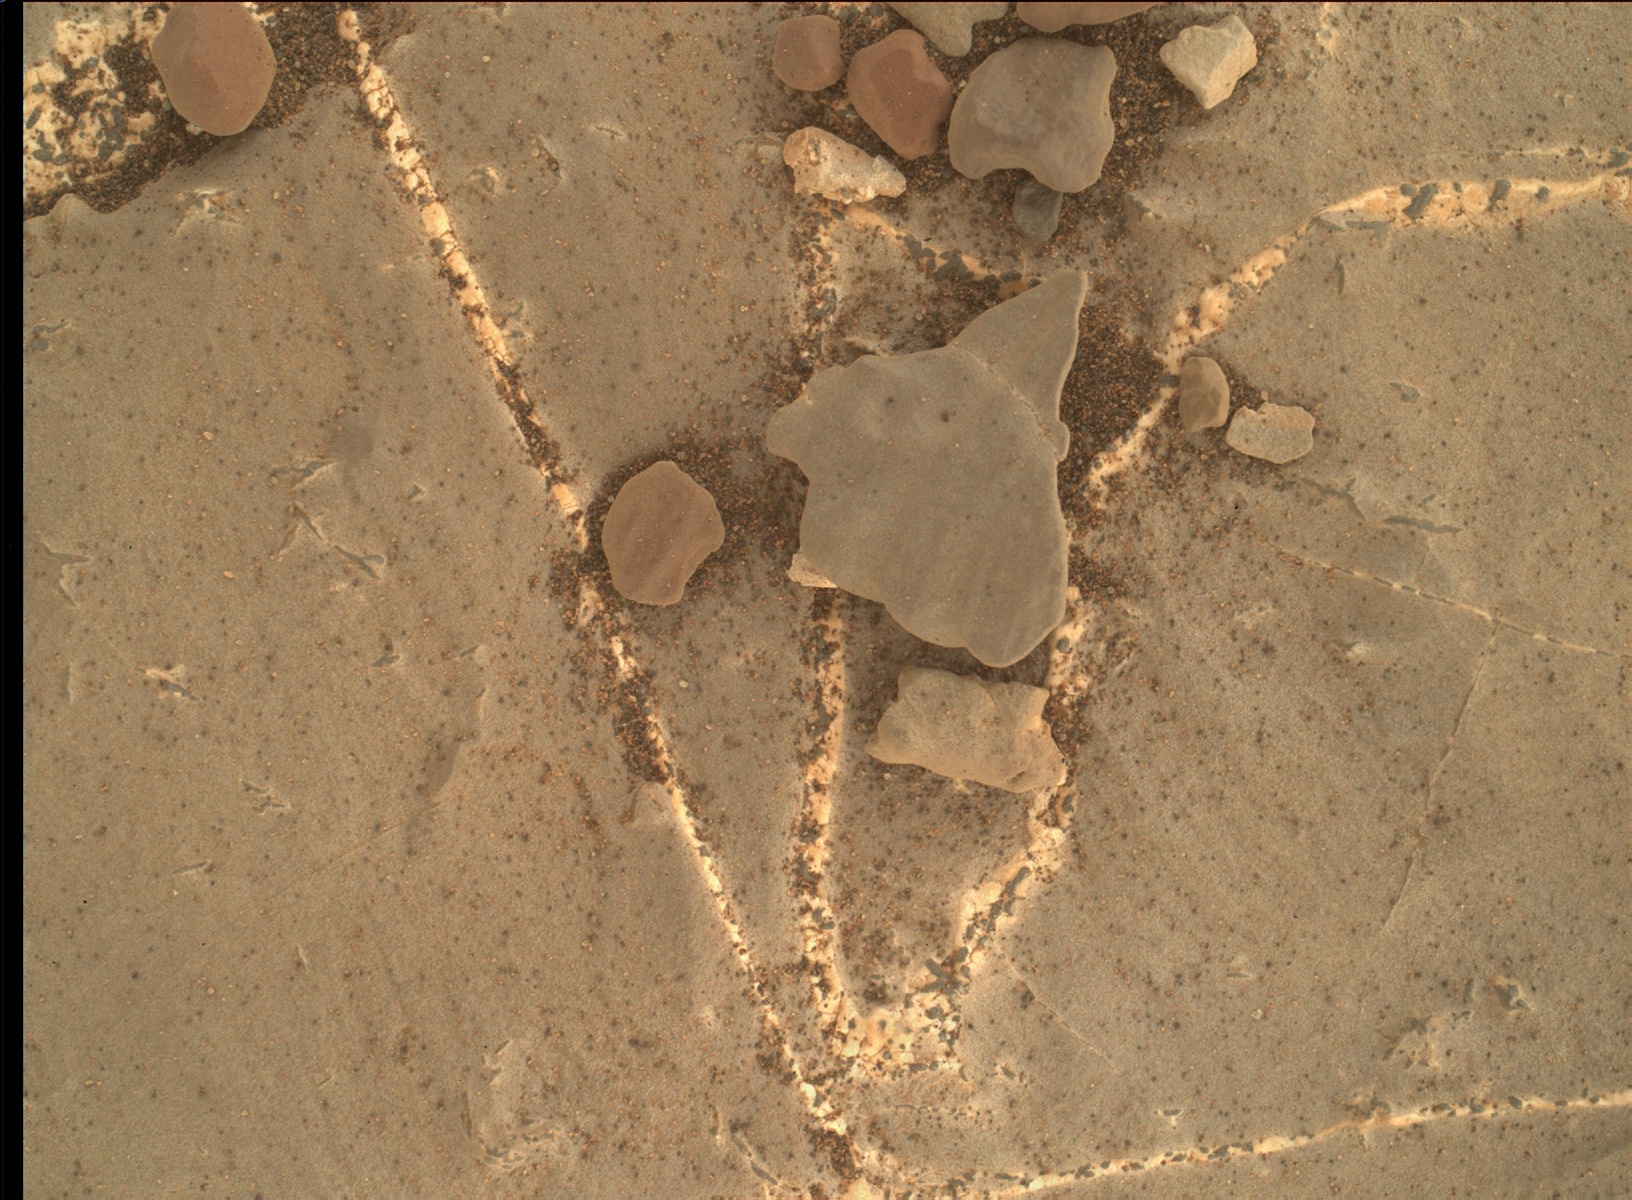 Nasa's Mars rover Curiosity acquired this image using its Mars Hand Lens Imager (MAHLI) on Sol 2218